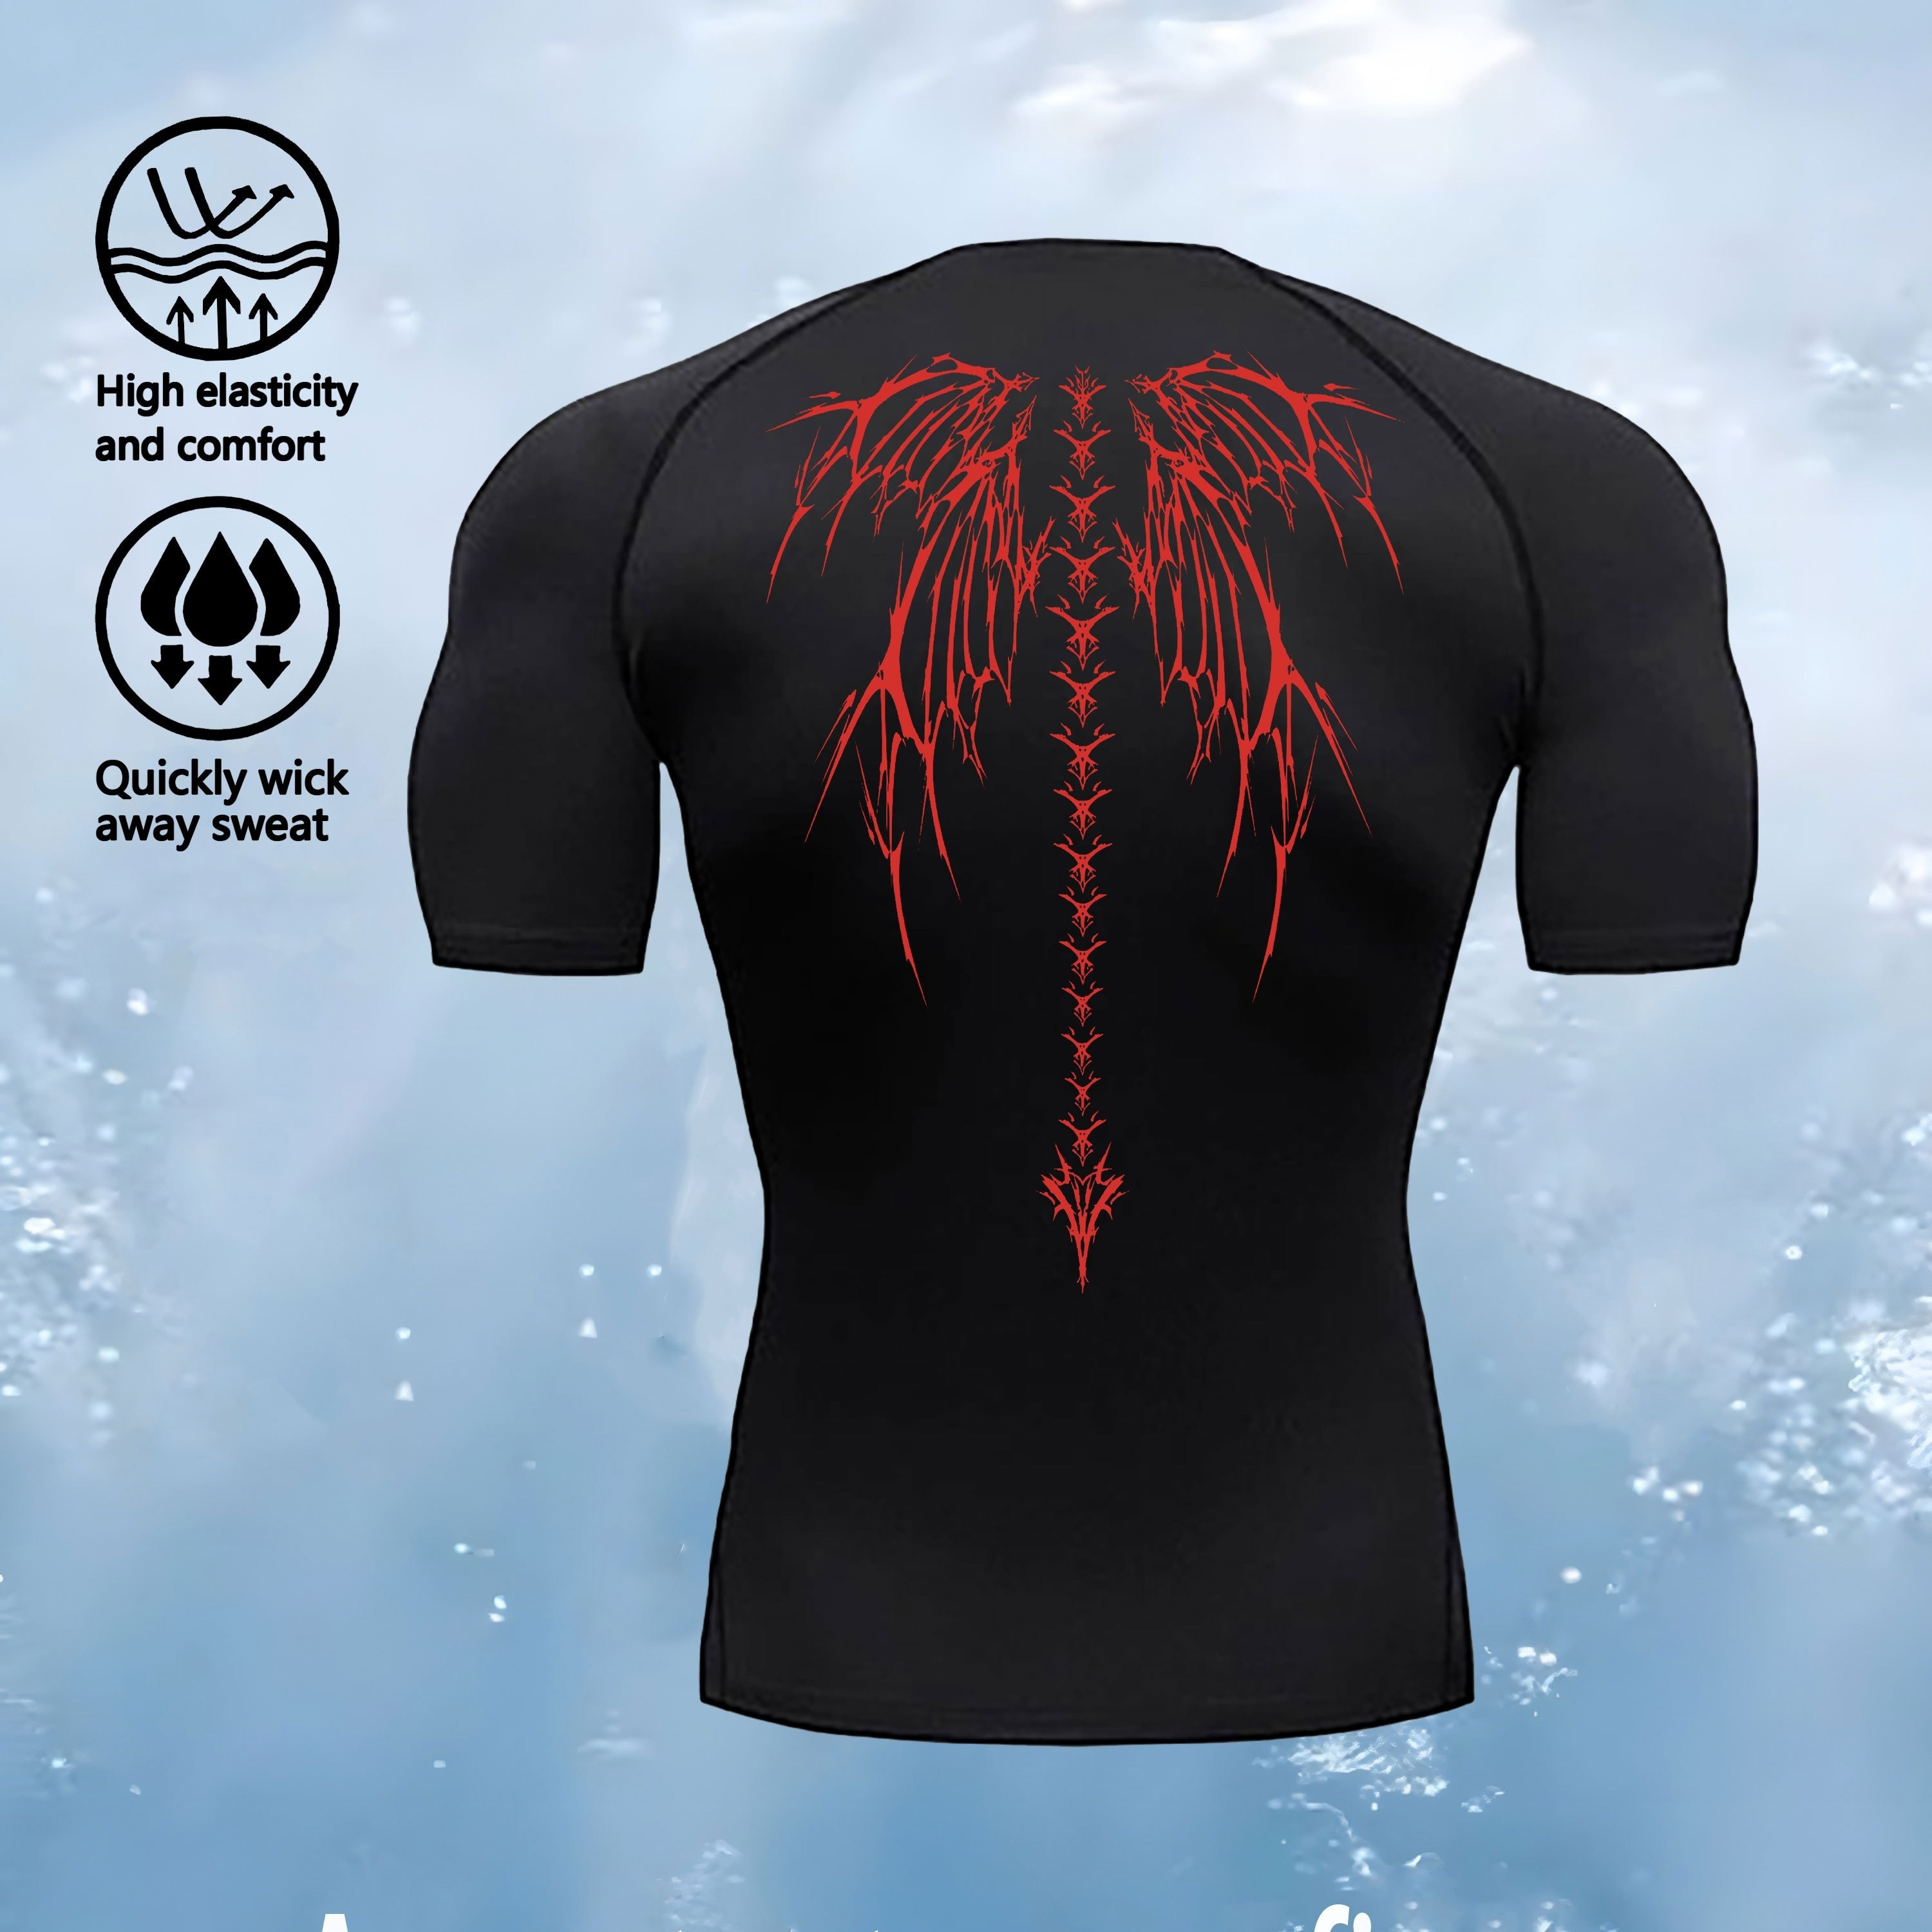 

Men's Muscle Fit T-shirt With Wings Print For Outdoor Gyms, Running, And Fitness